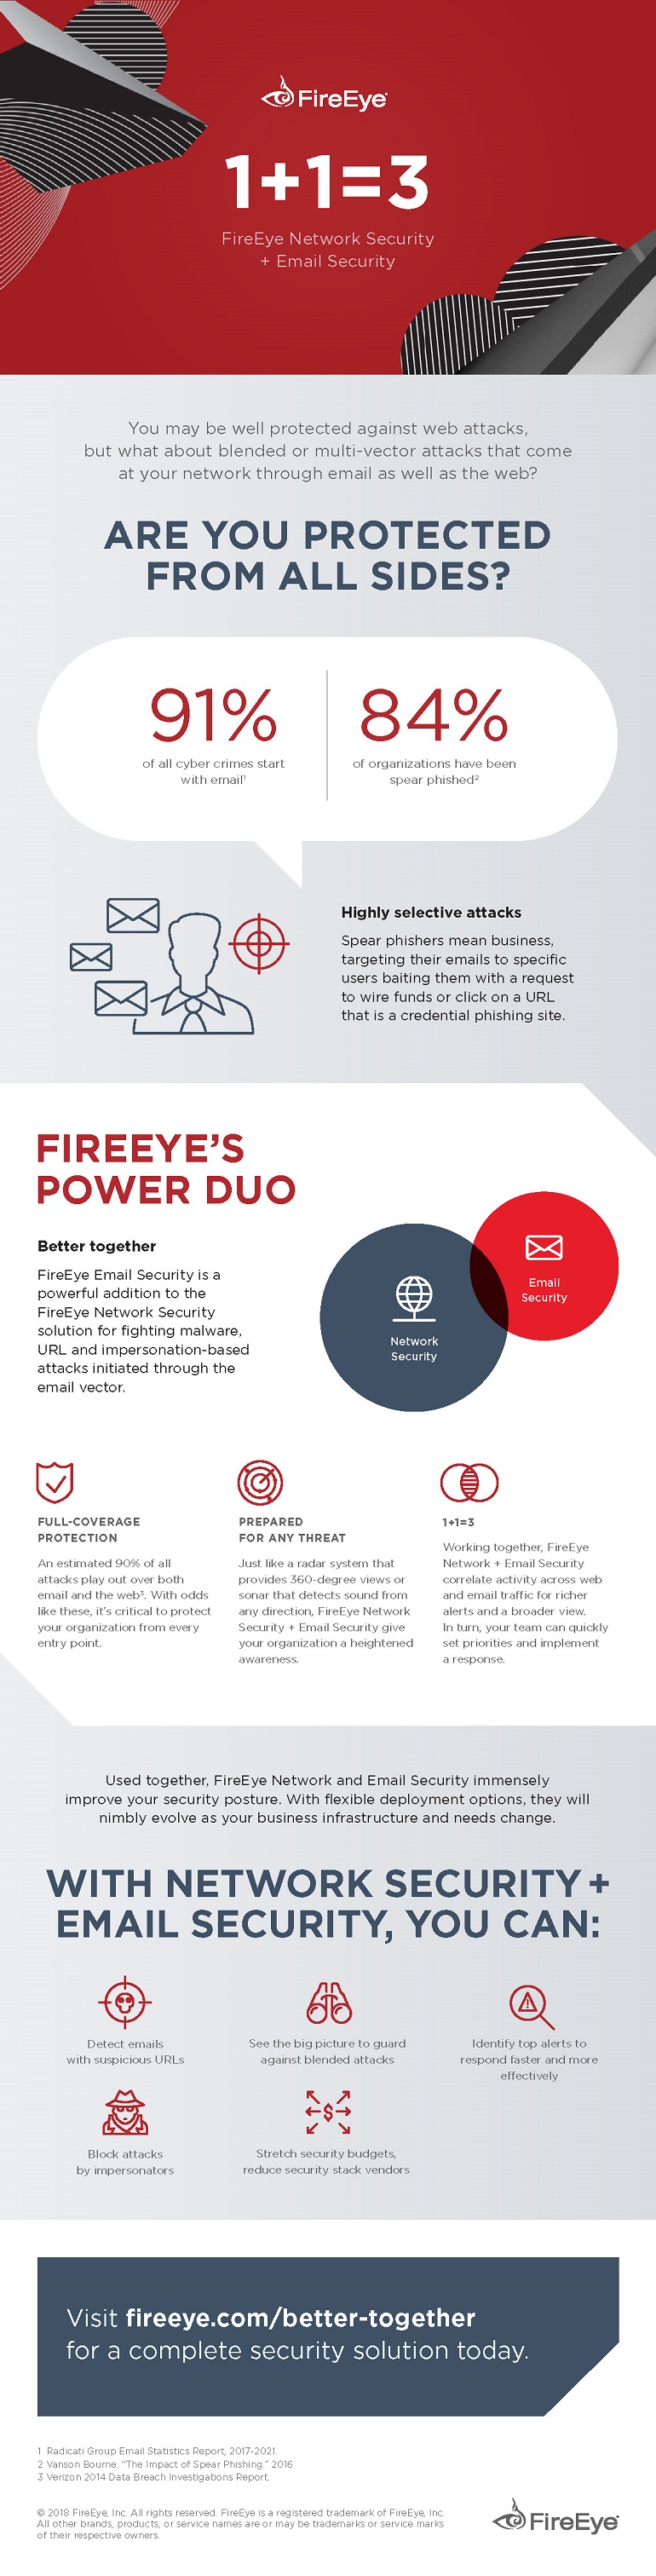 FireEye Network and Email Security